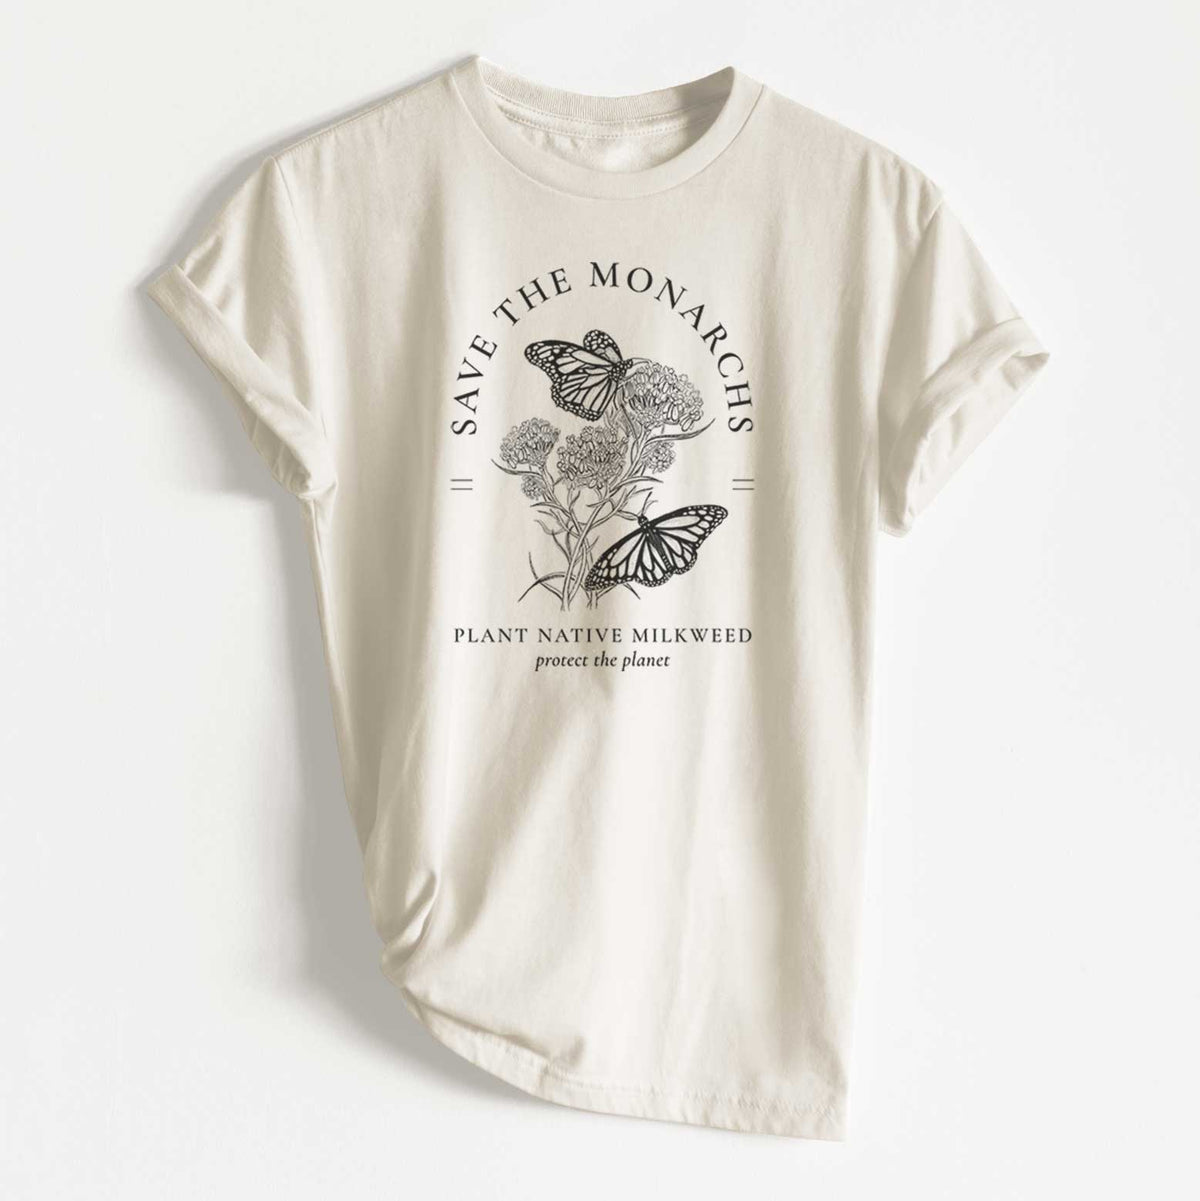 Save the Monarchs - Plant Native Milkweed - Unisex Recycled Eco Tee  - CLOSEOUT - FINAL SALE